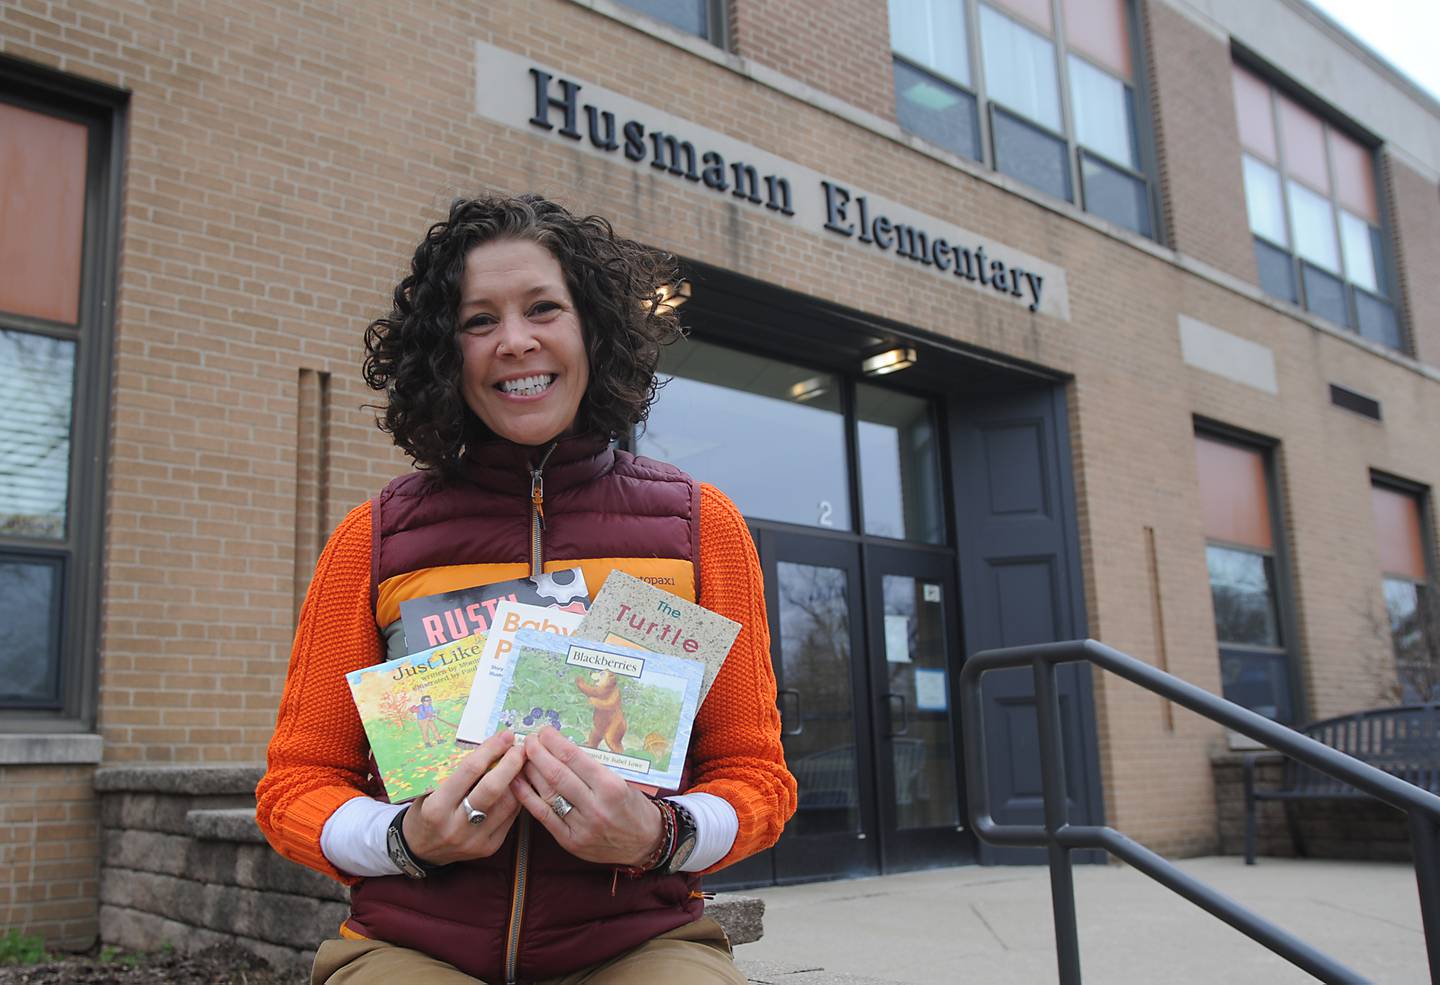 Mal Keenan, who has served as the Reading Recovery teacher for Crystal Lake Elementary School District 47, outside one of the schools she travels between to help students. Reading Recovery is a research-based, short-term intervention delivered one-on-one for first-grade students.